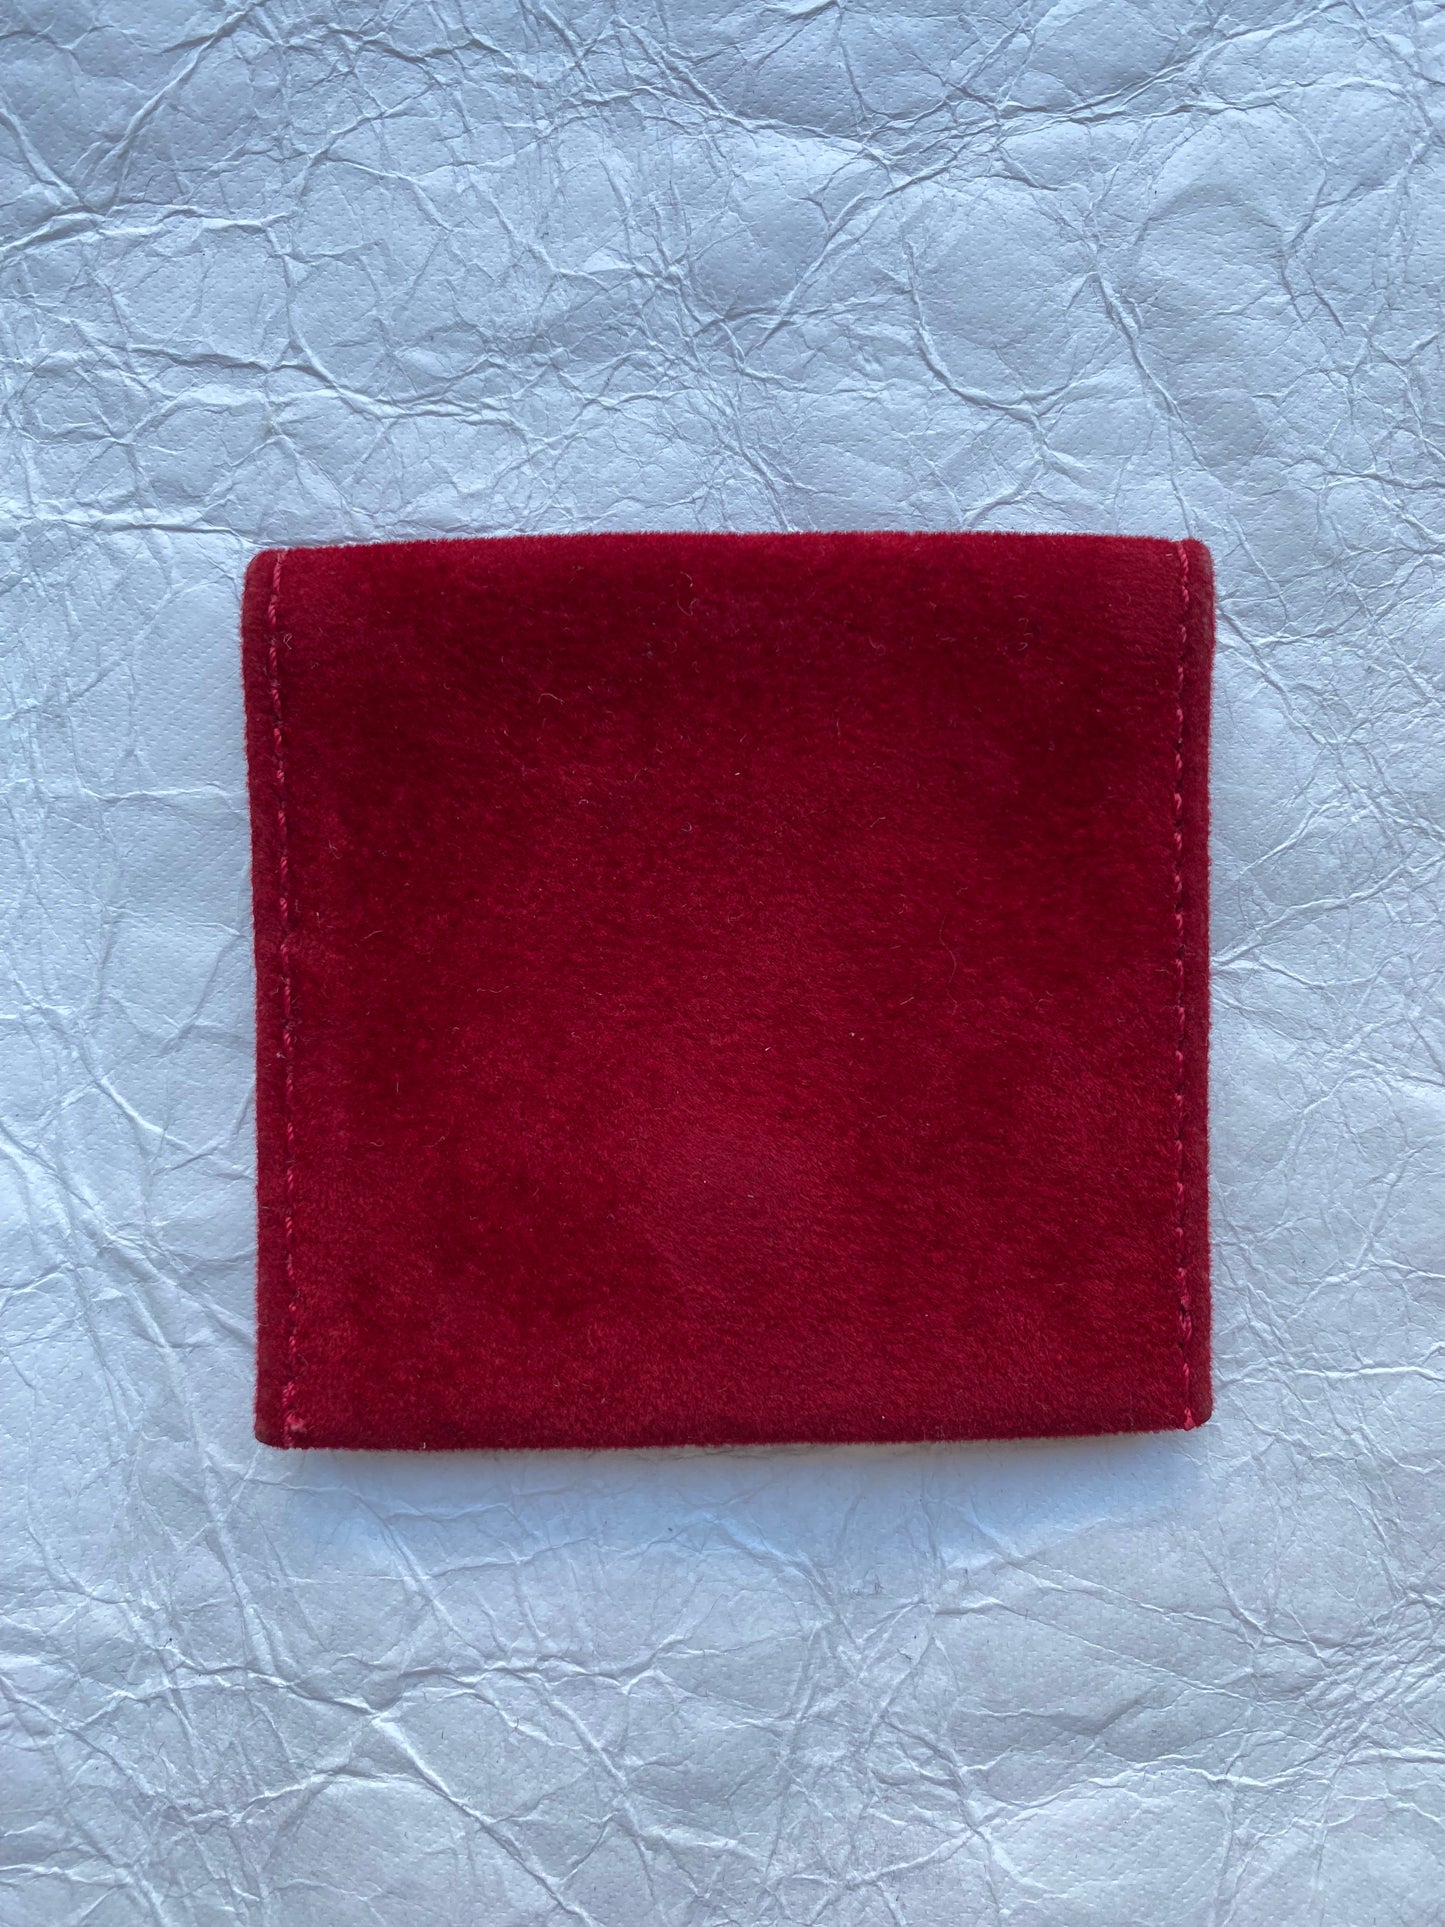 CARTIER VELVET JEWELRY POUCH RED.